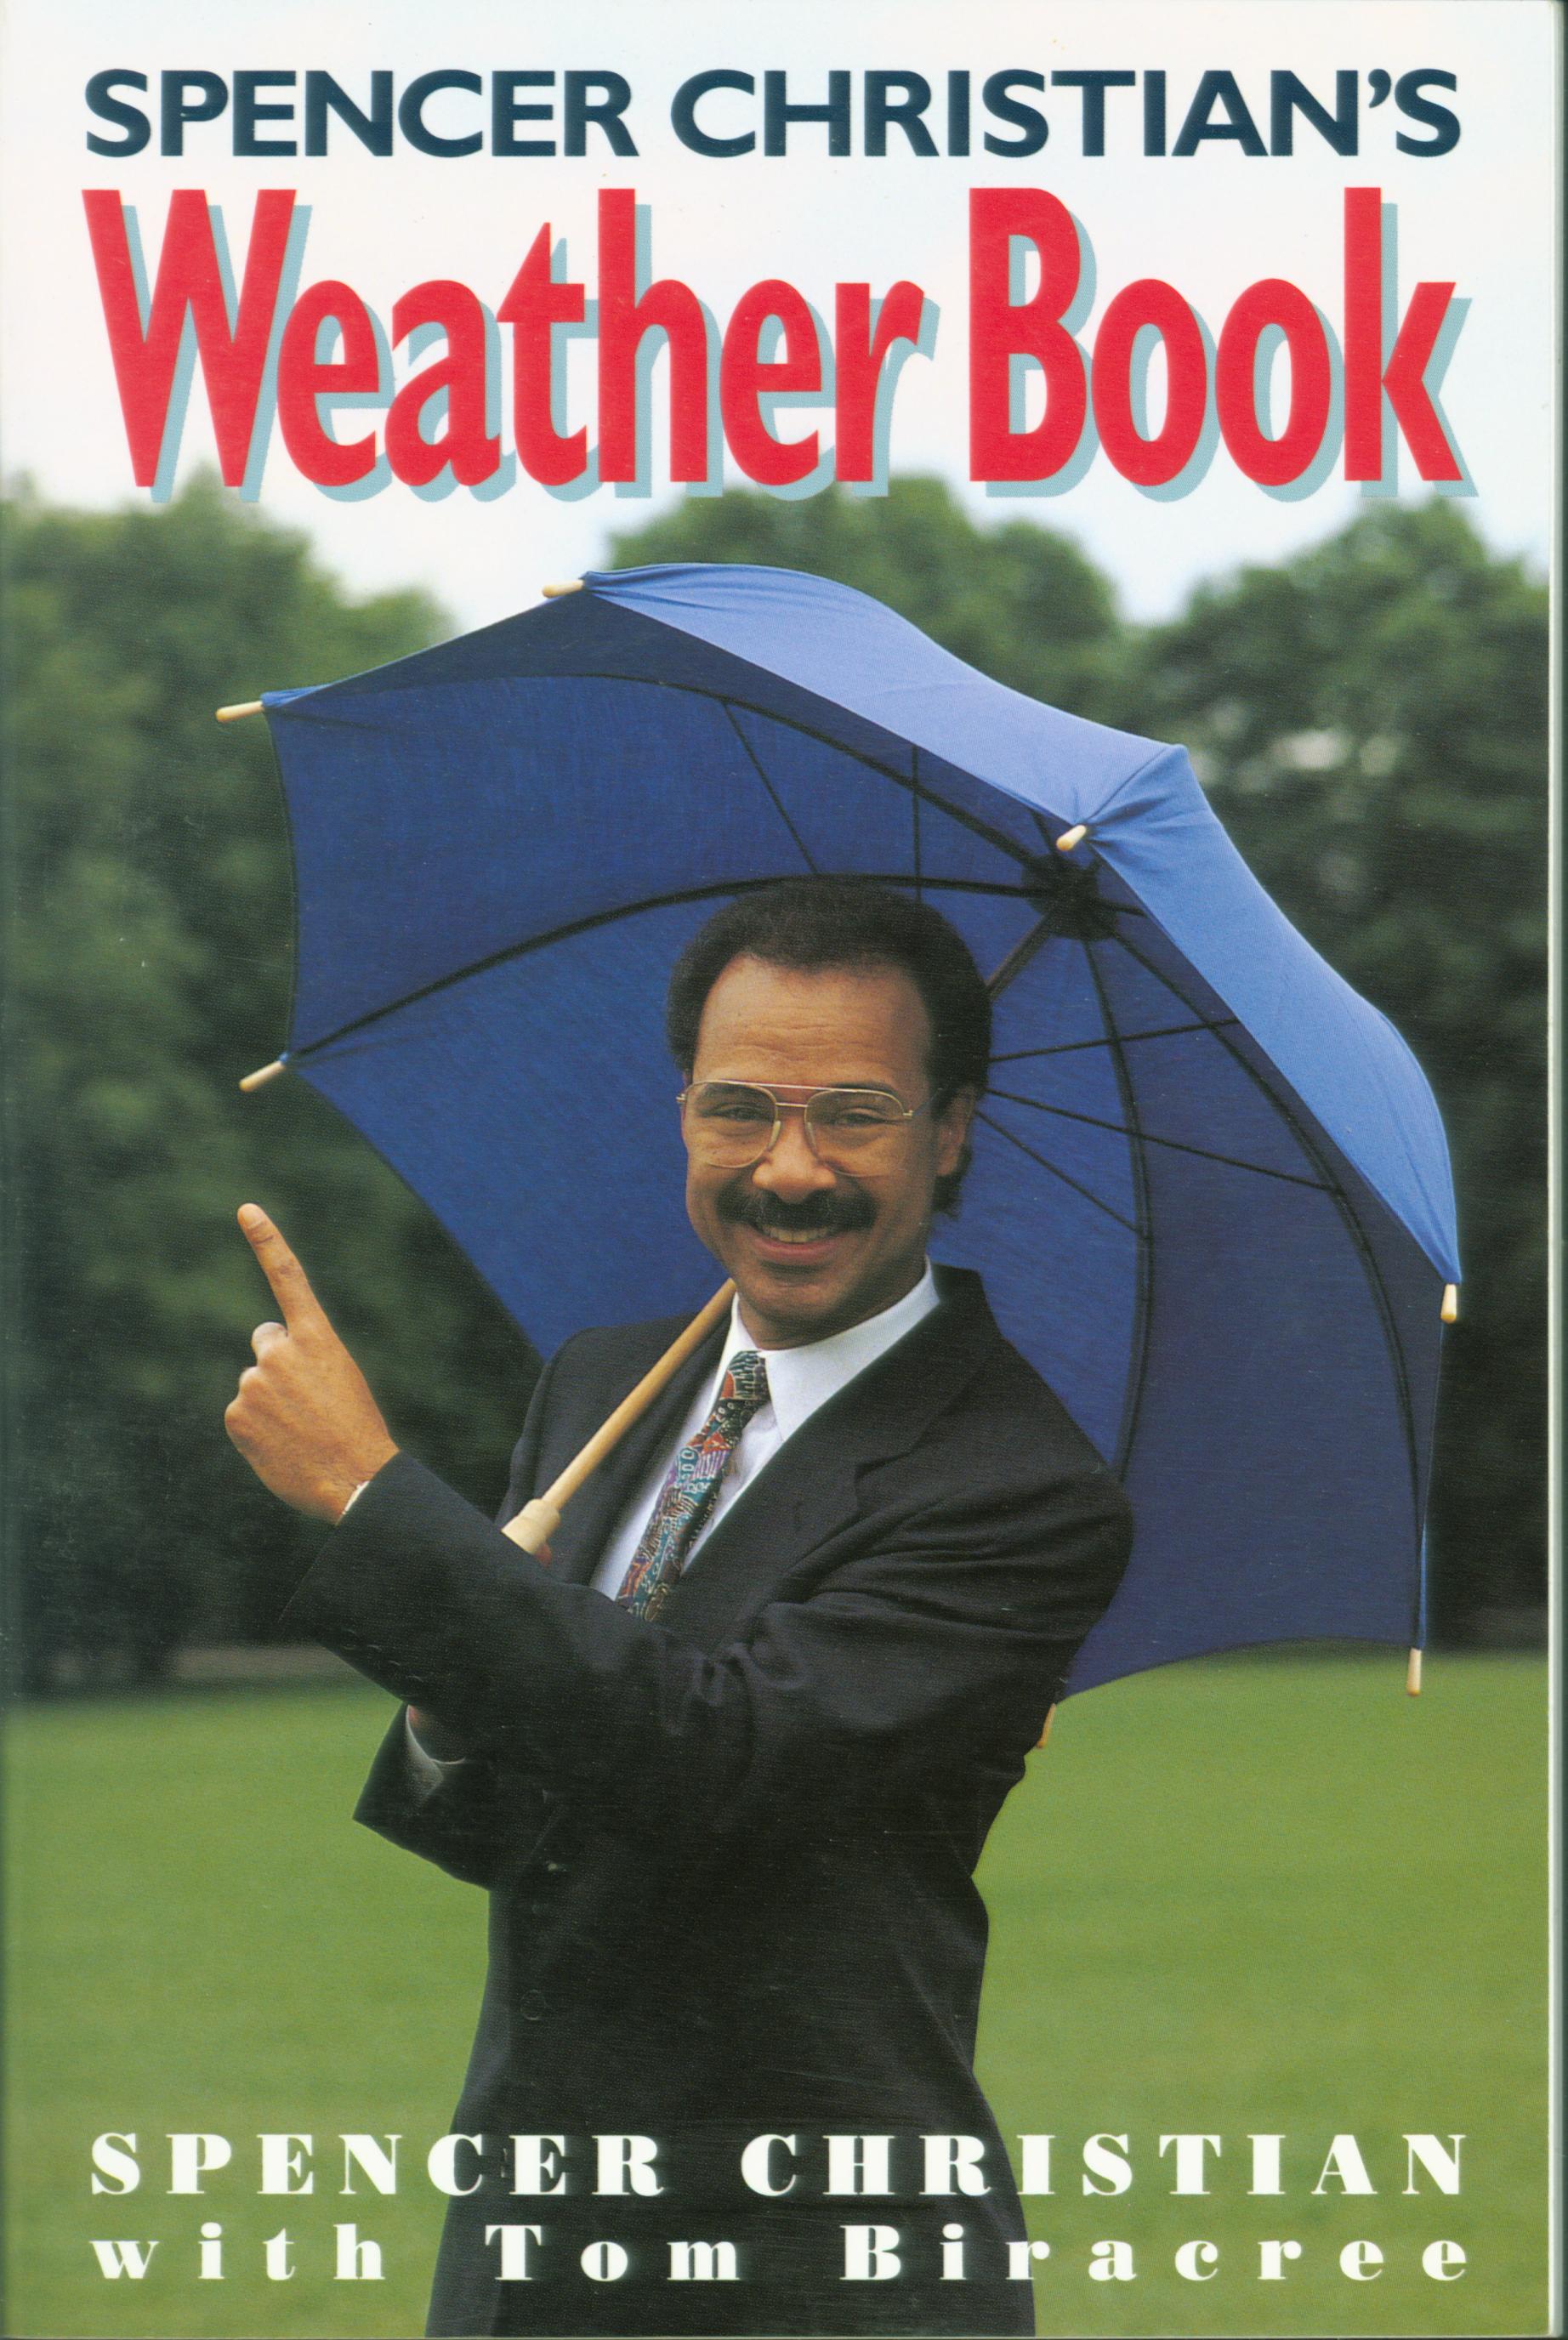 SPENCER CHRISTIAN'S WEATHER BOOK.